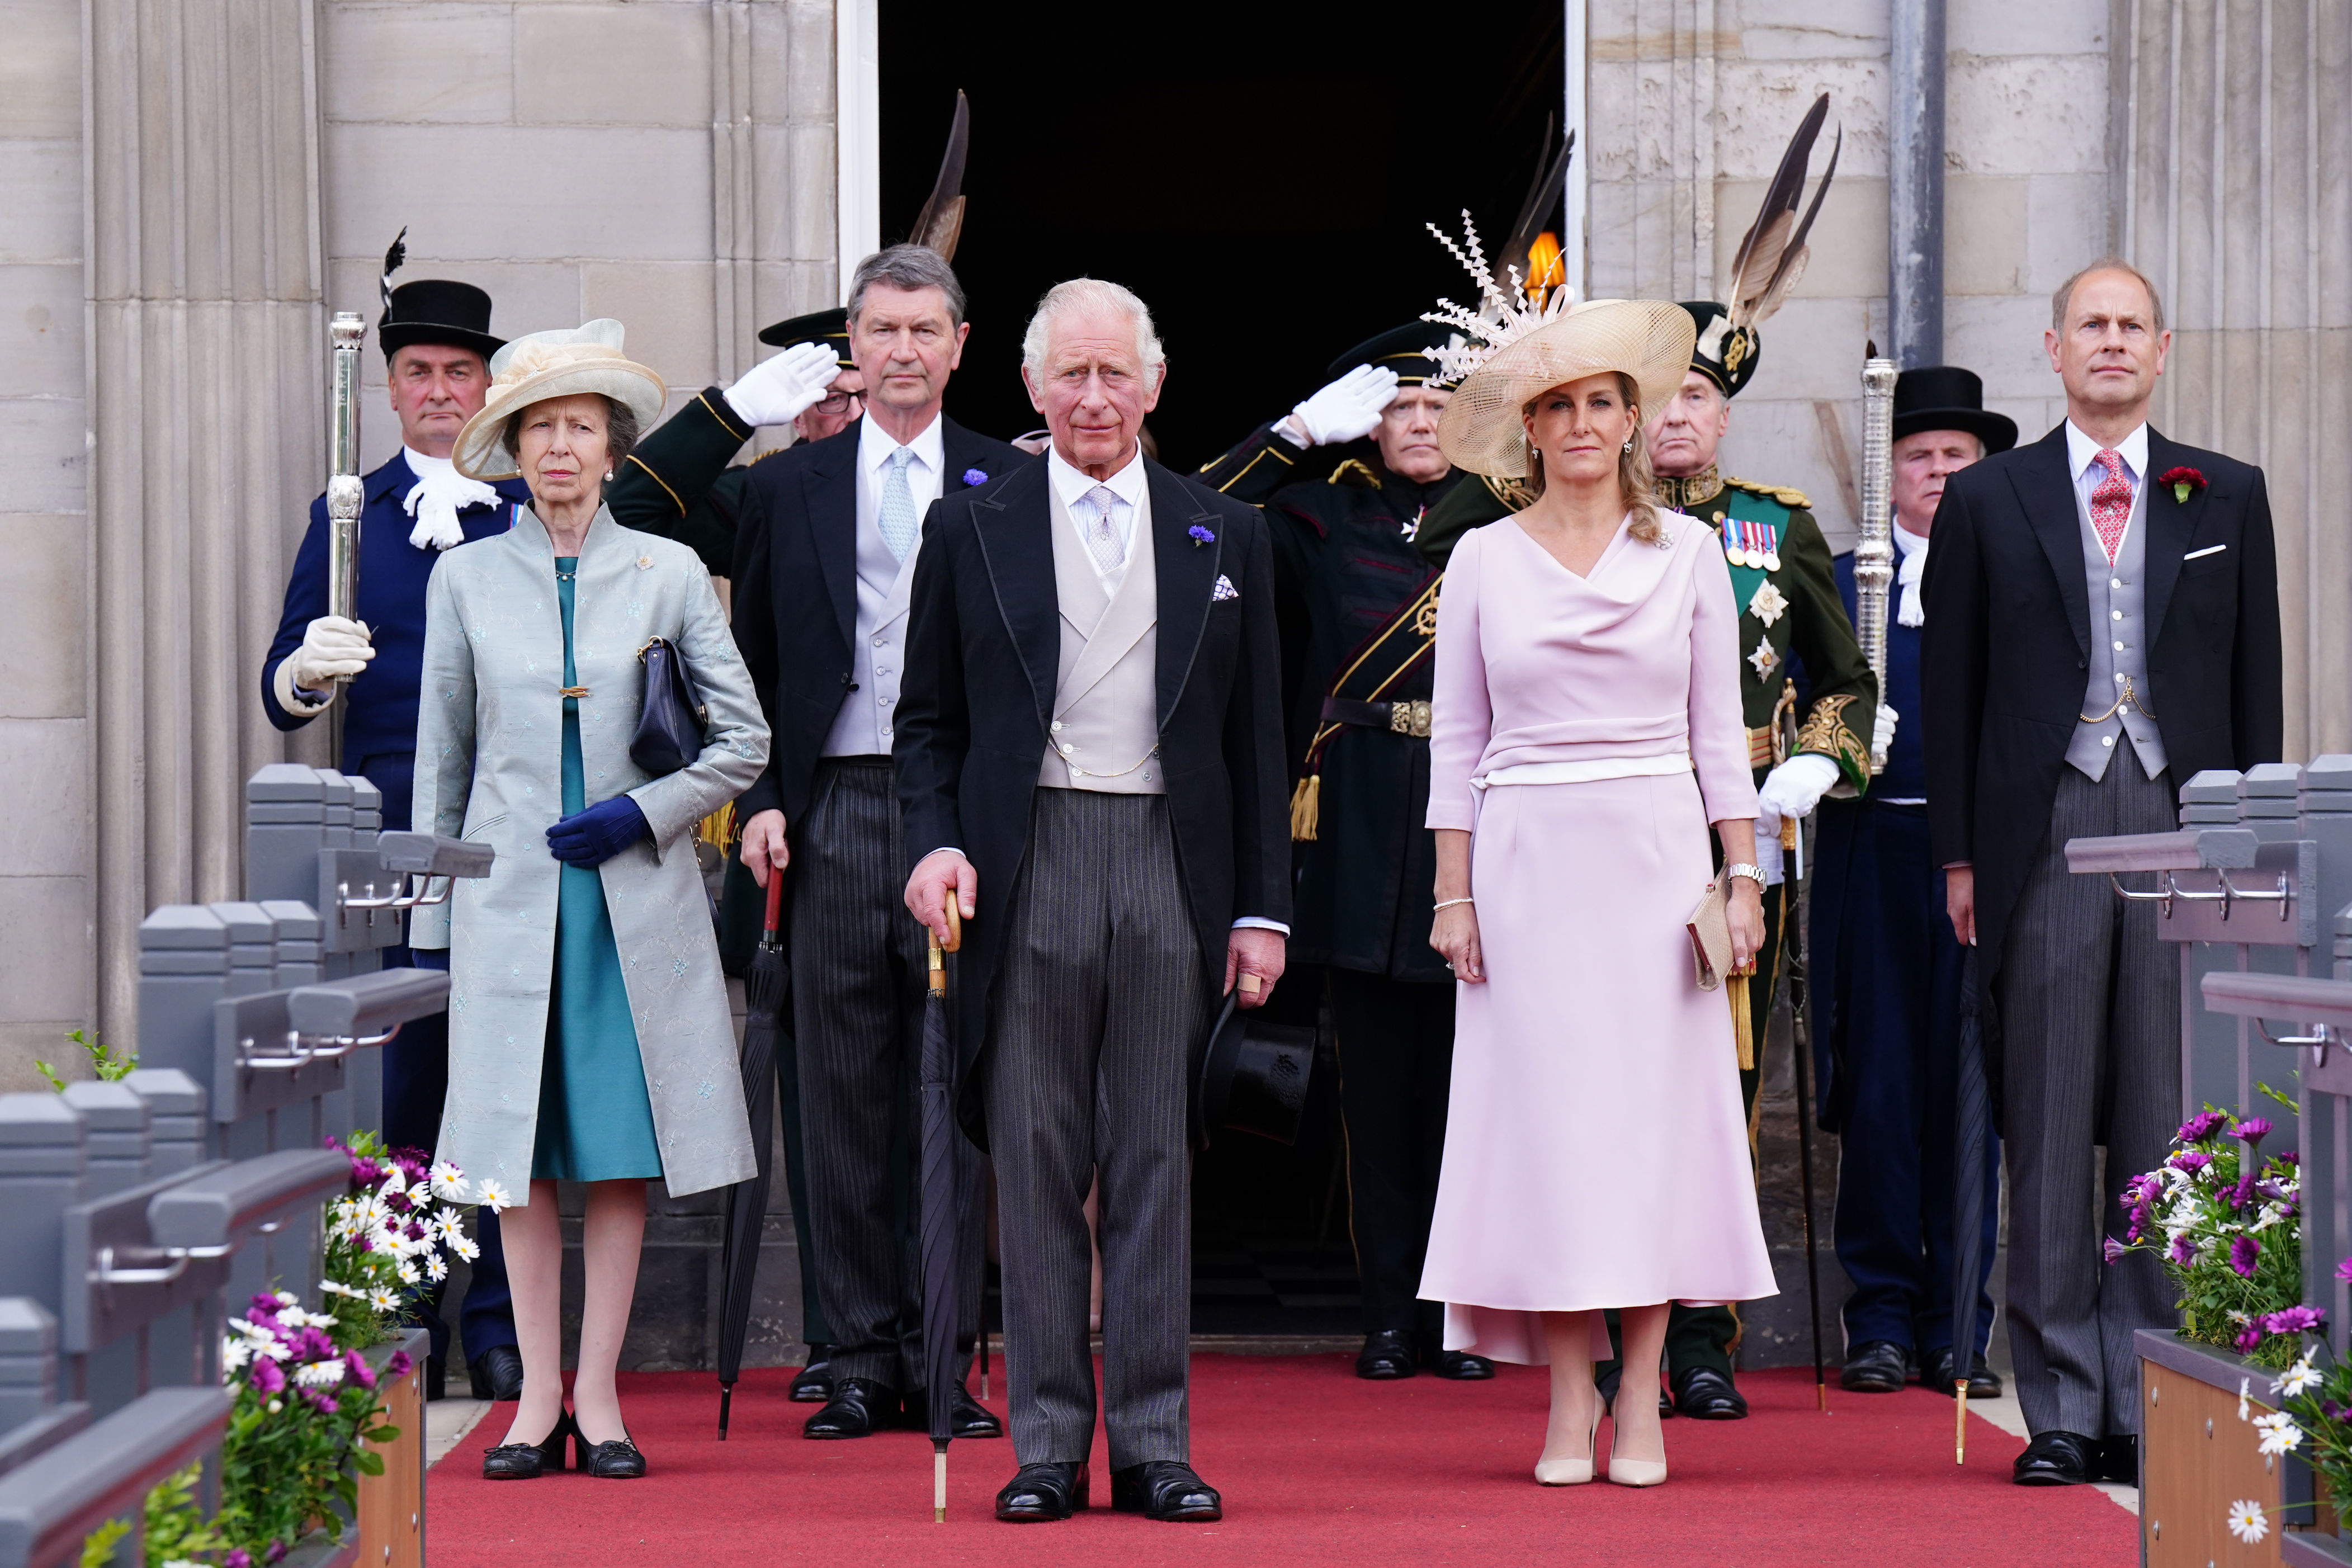 <p>The royal gang's all here! Princess Anne and her husband, Vice Admiral Sir Timothy Laurence; Prince Charles; and Sophie, Countess of Wessex and her husband, Prince Edward, all attended a garden party at the Palace of Holyroodhouse in Edinburgh, Scotland, on June 29, 2022, during the queen's traditional trip to Scotland for Holyrood Week.</p>